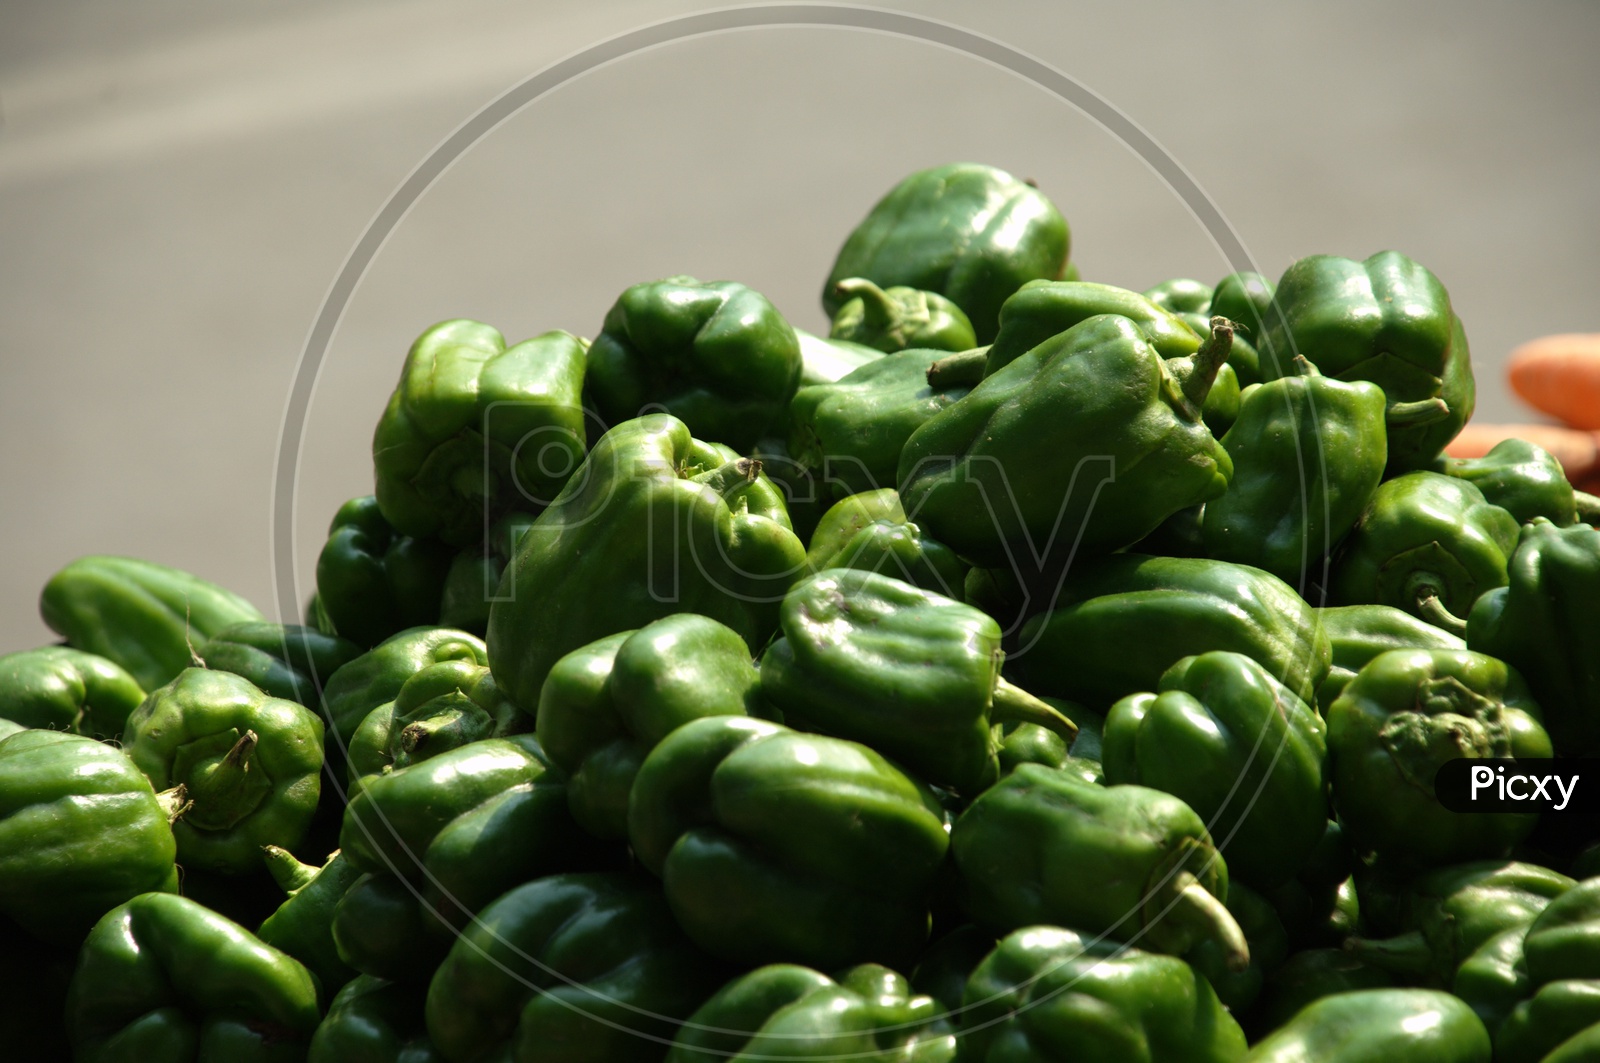 Green Bell peppers